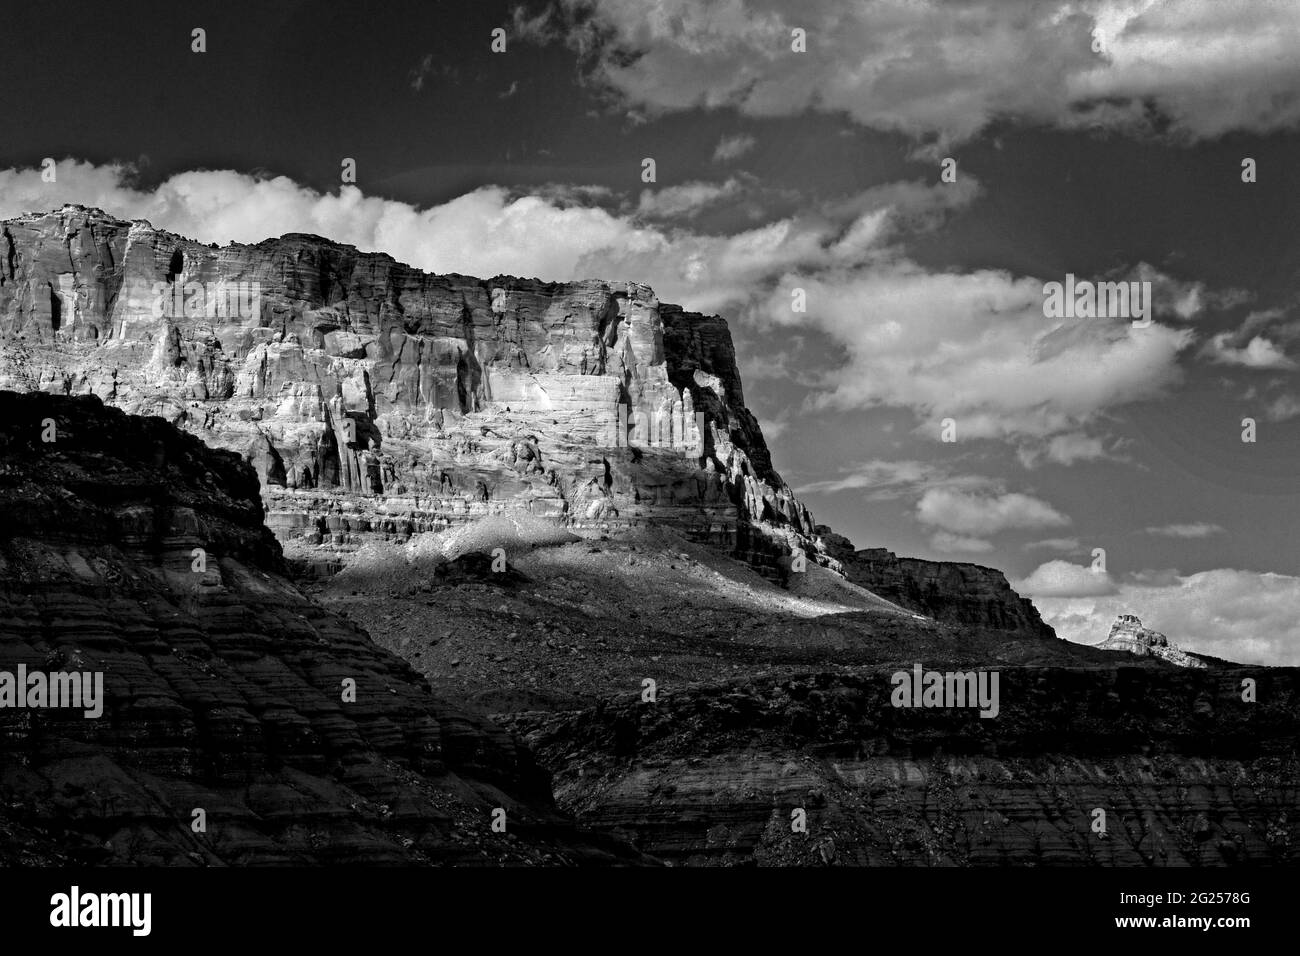 Crisp, clean black and white image of clouds, a canyon, a steep rock cliff and a flat mesa. Sharp contrasts between blacks and whites. Beautiful image Stock Photo